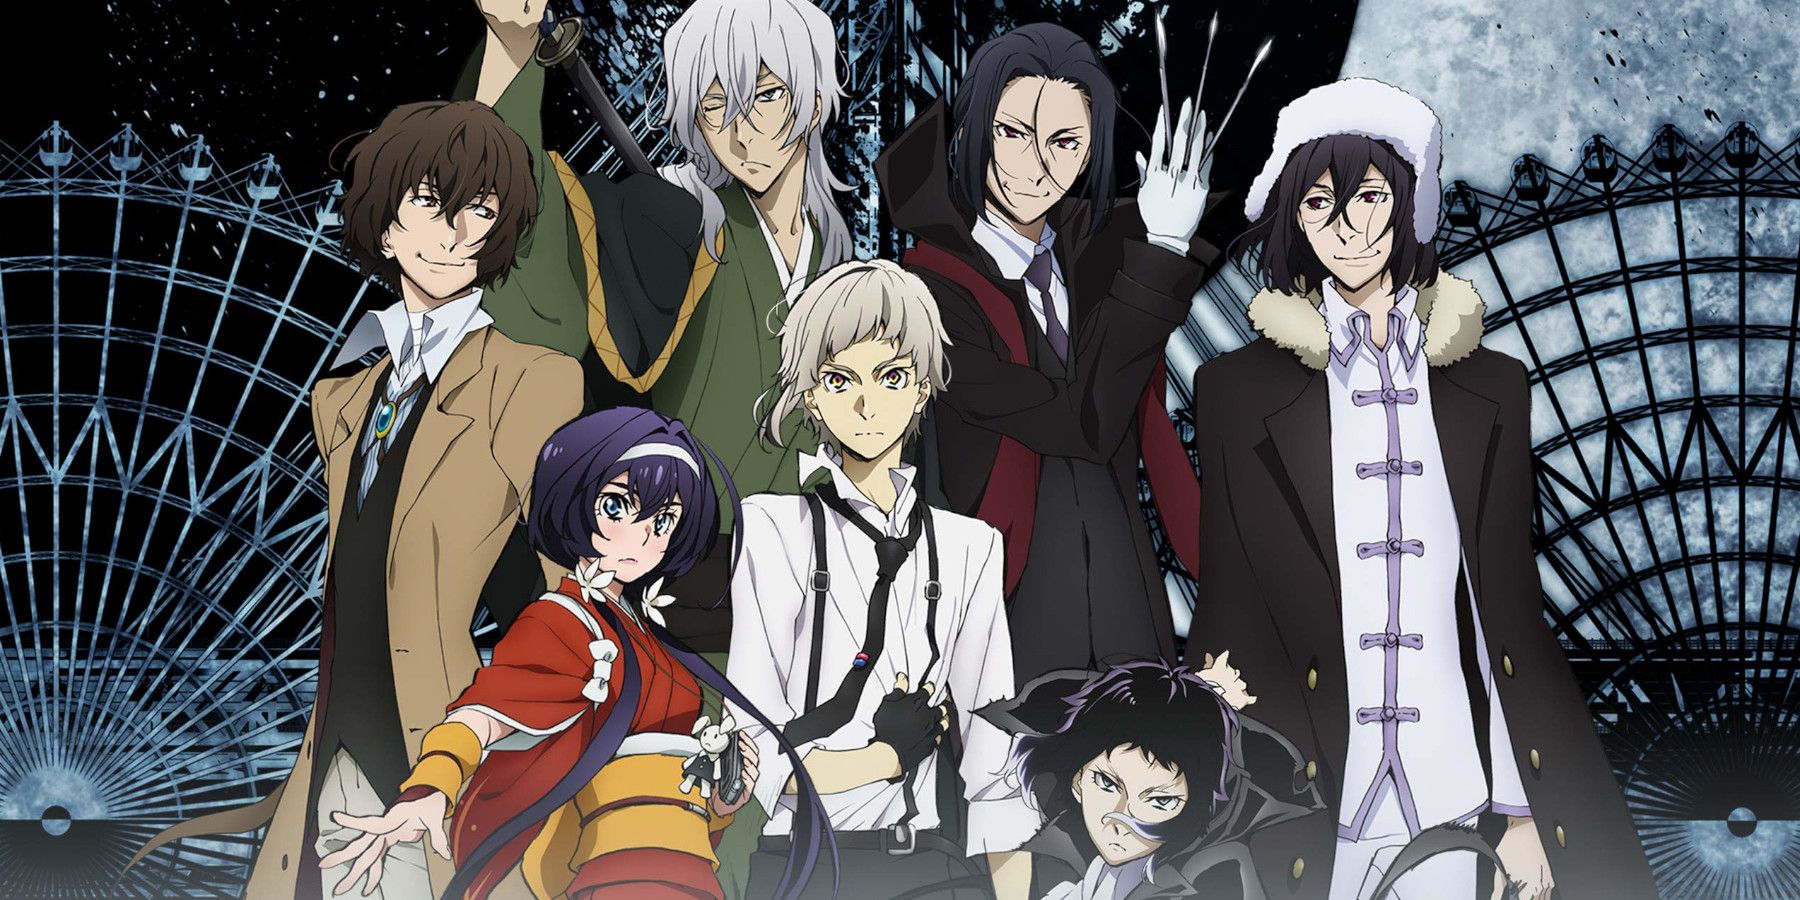 Bungo Stray Dogs: Dead Apple Review - But Why Tho?